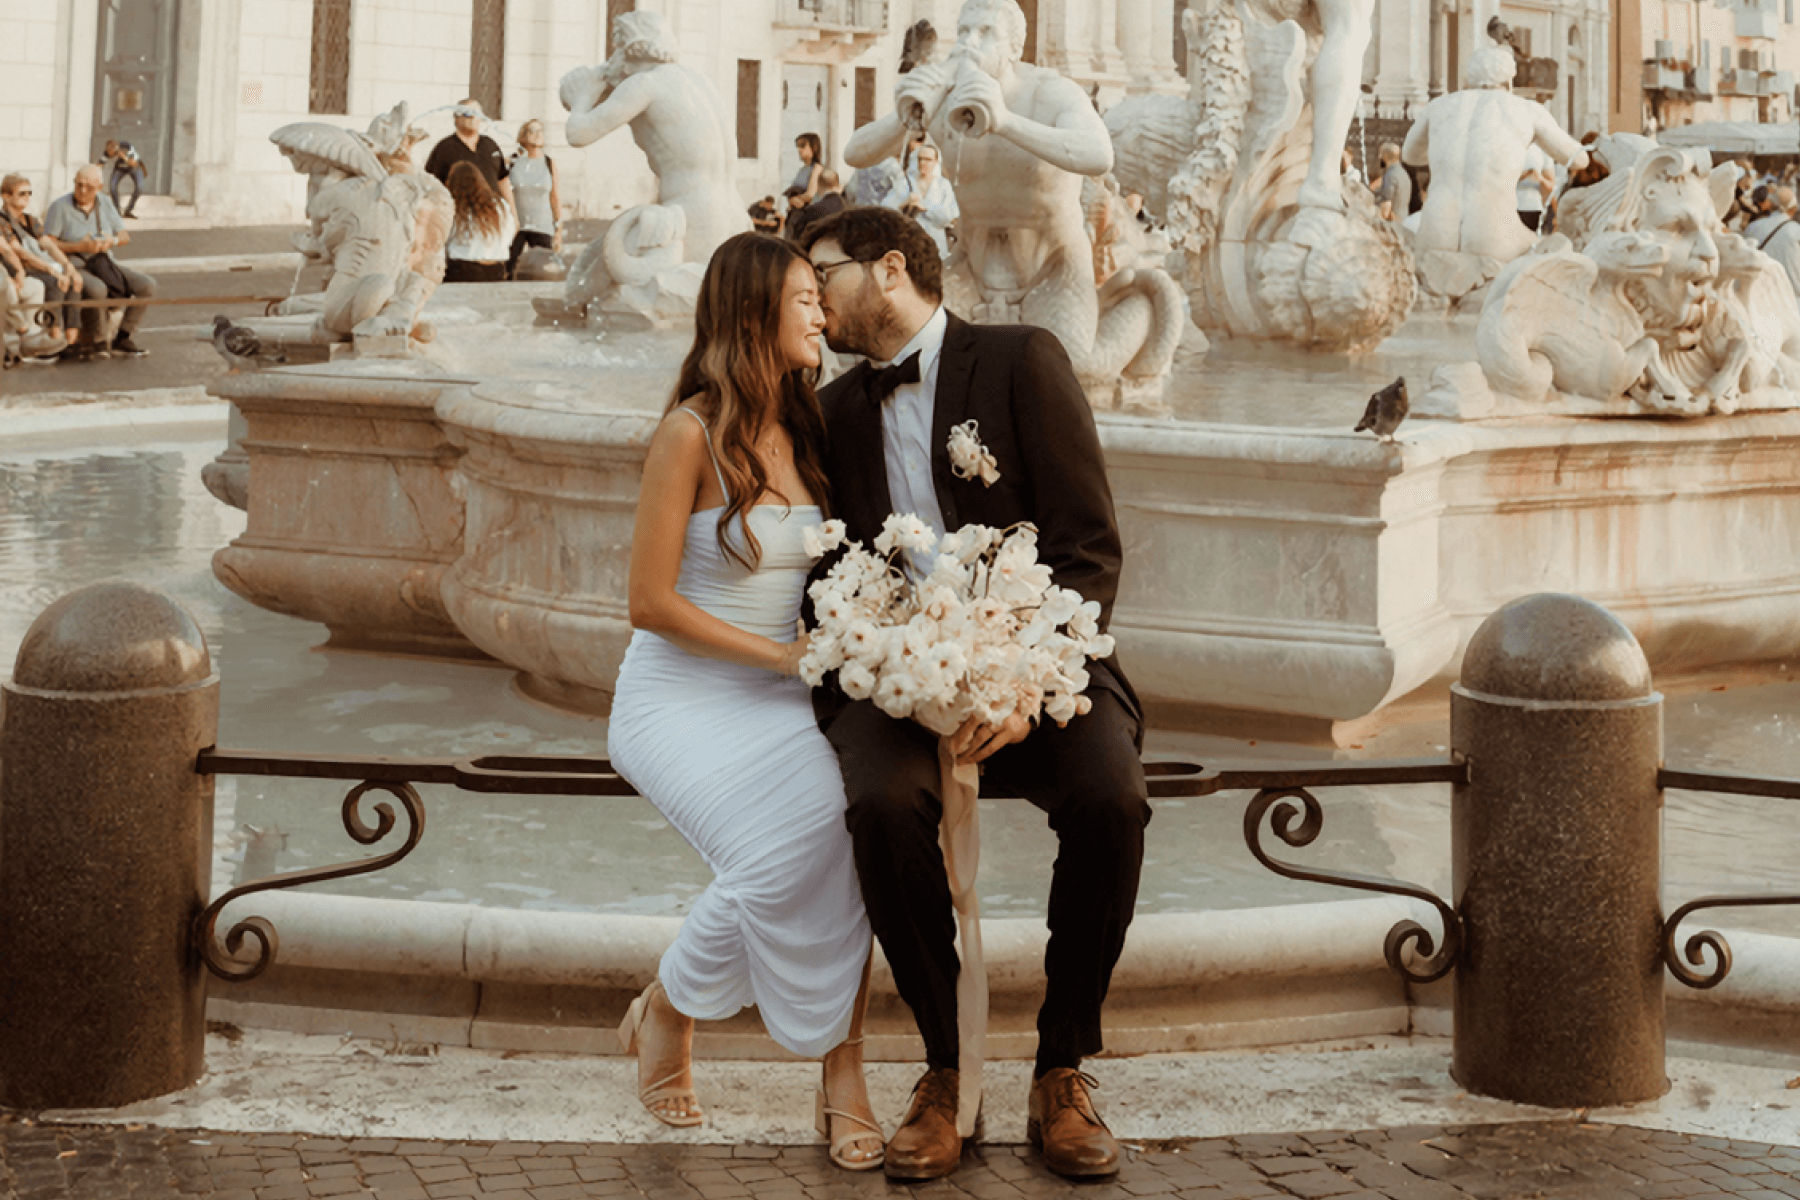 A woman and man in wedding attire and carrying a bouquet of white flowers nuzzle affectionately as they sit on a rail in front of an intricately sculpted fountain.